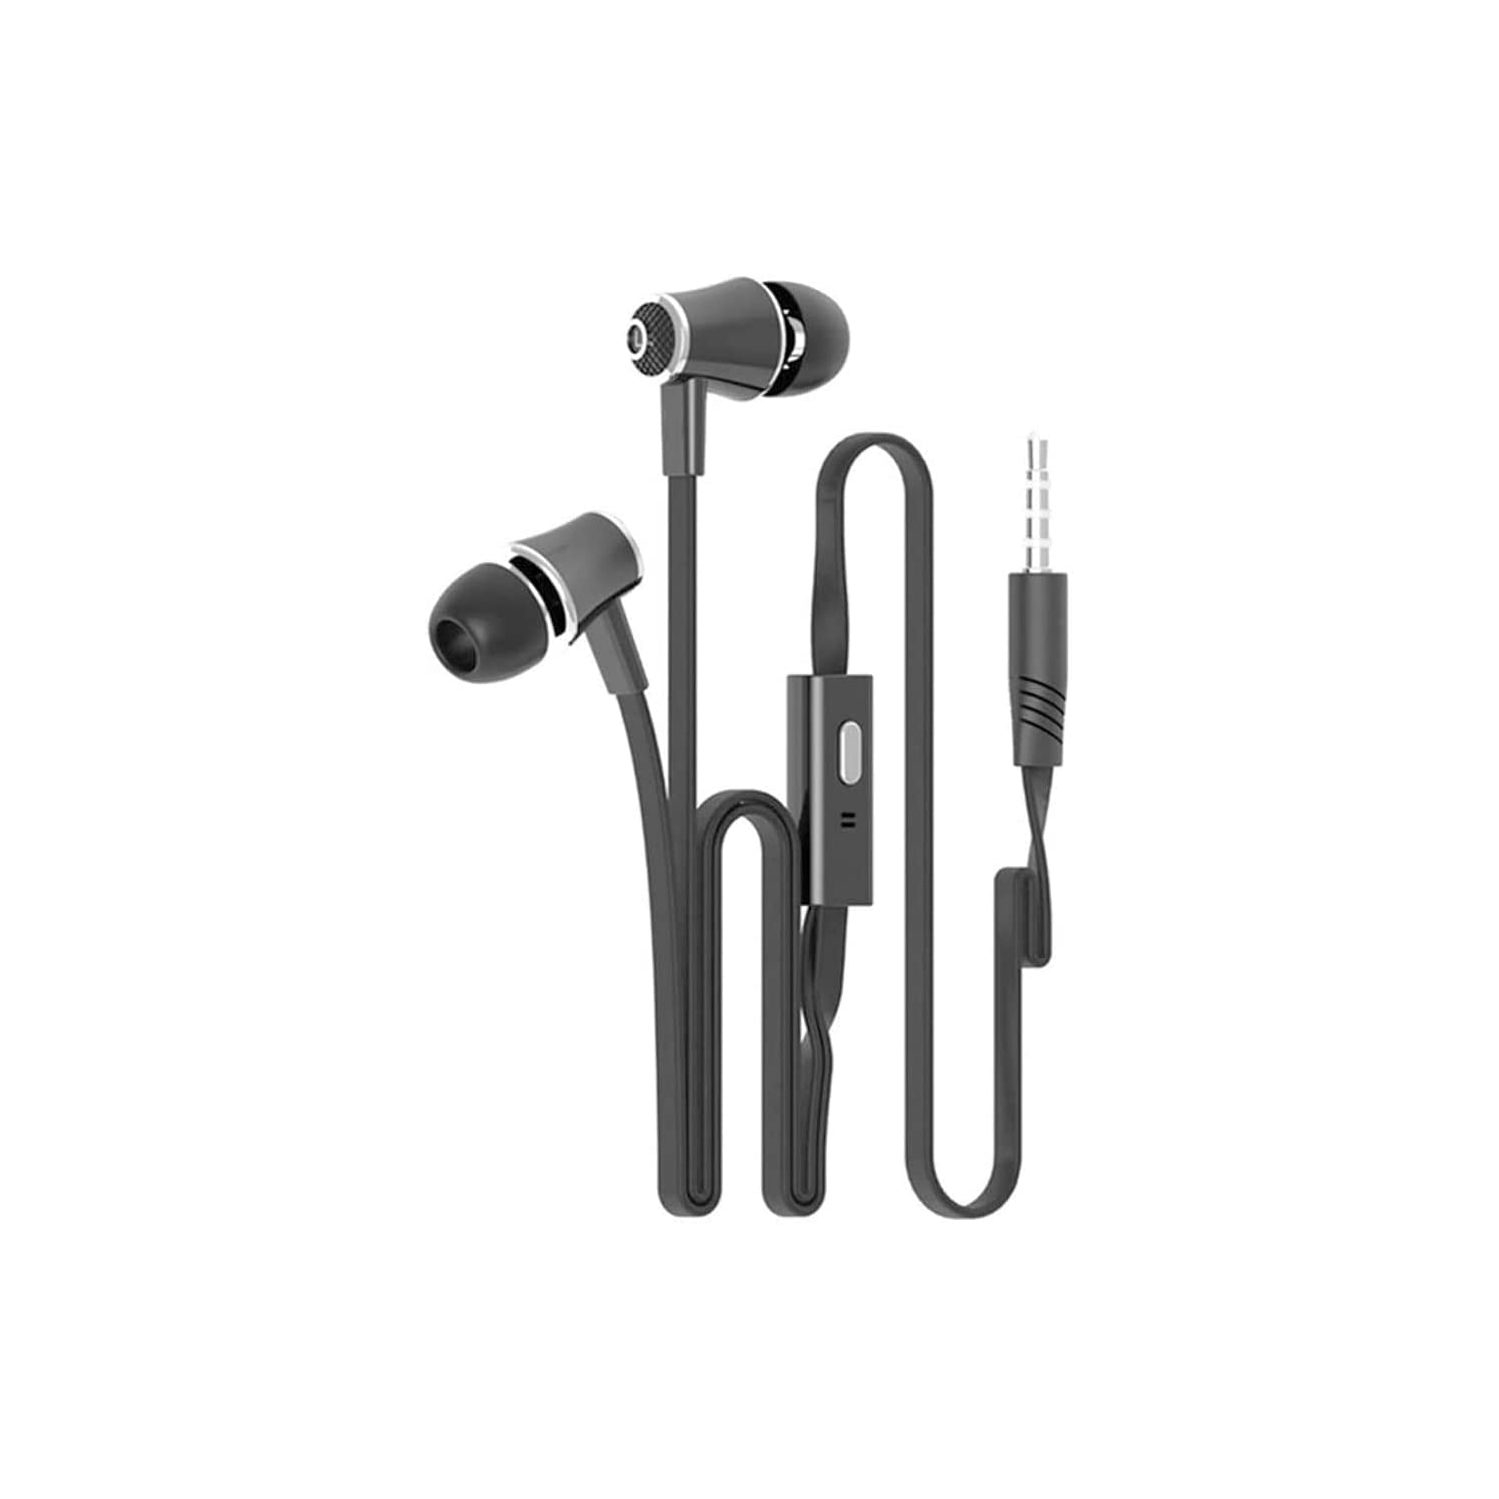 Dolaer Earbuds for Kindle Fire,Earphone for Kindle eReaders, Fire HD 8 HD 10, Kindle Voyage Oasis Earbuds, Xperia XZ Premium/Xperia XZs/ L1 in Ear Headset Smart Android Cell Phones